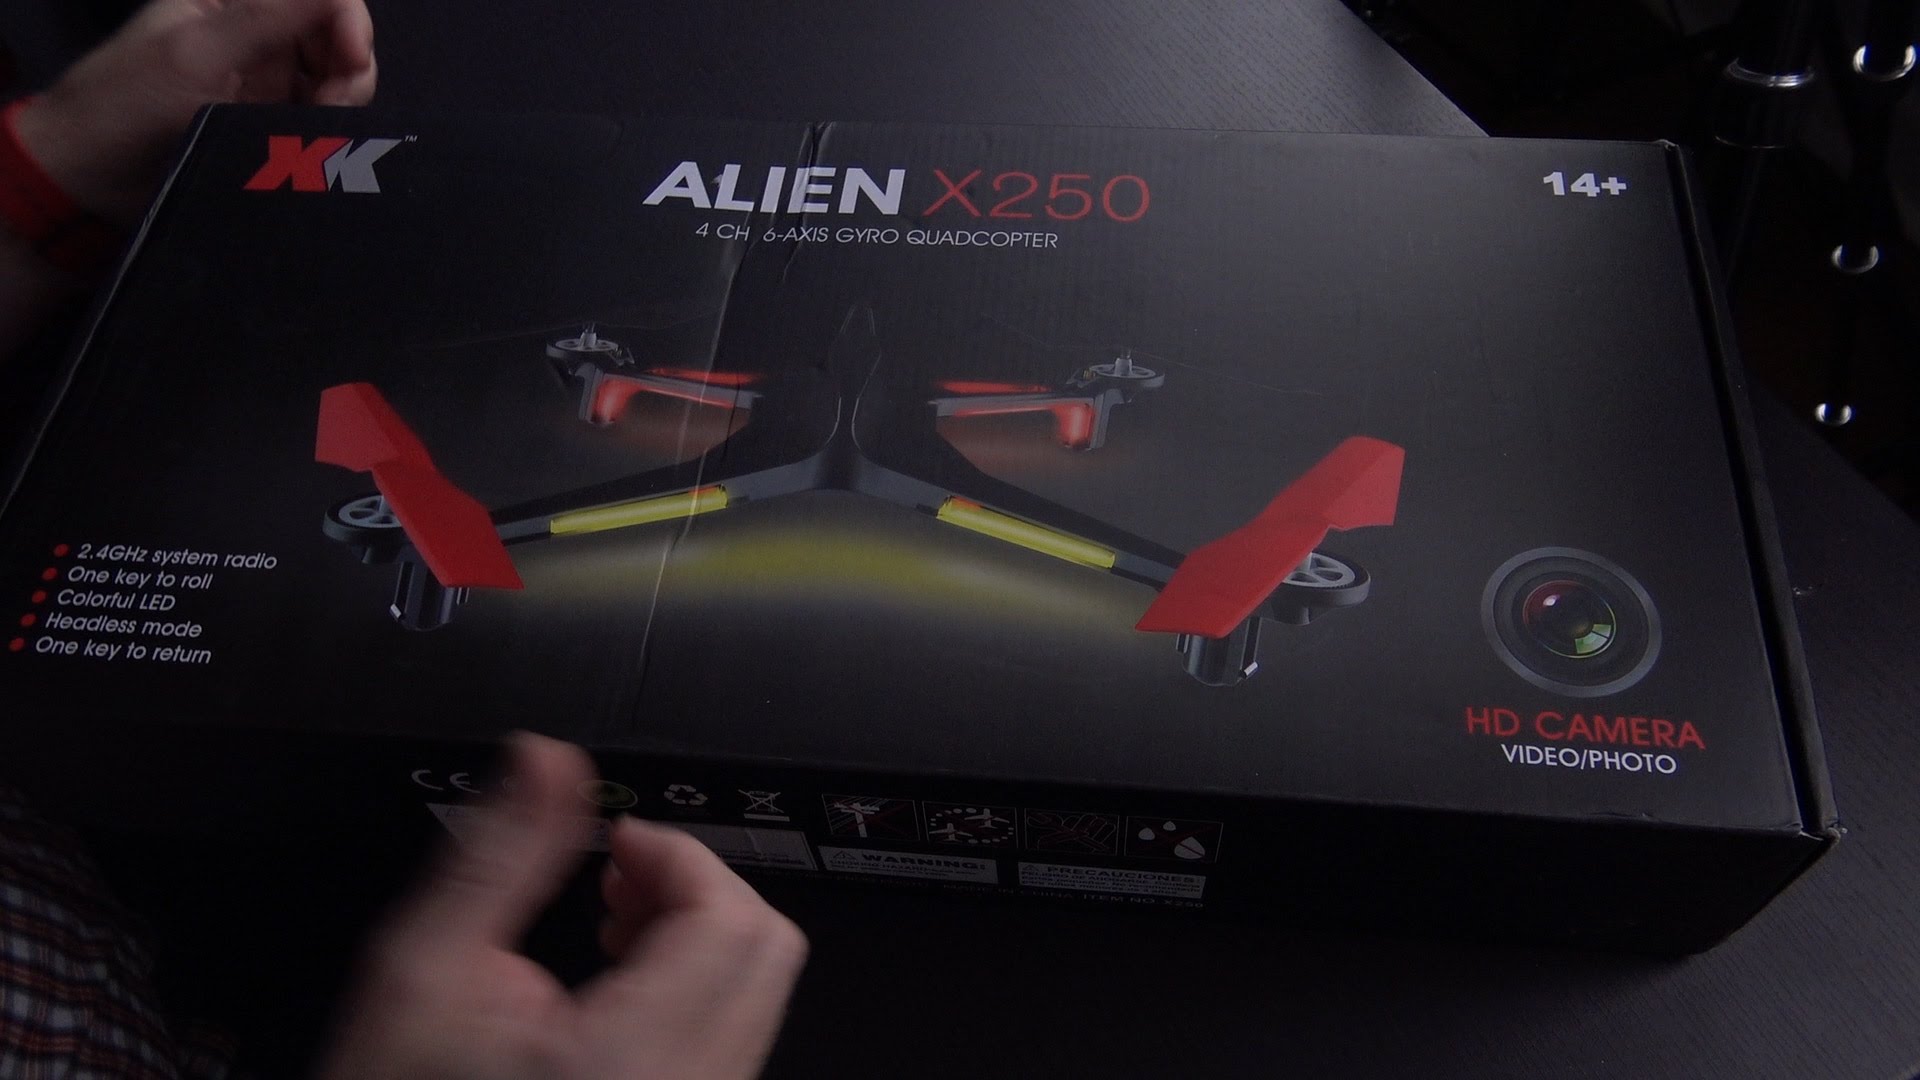 XK X250 Alien 5.8Ghz FPV Quadcopter – Sporty with Great FPV?